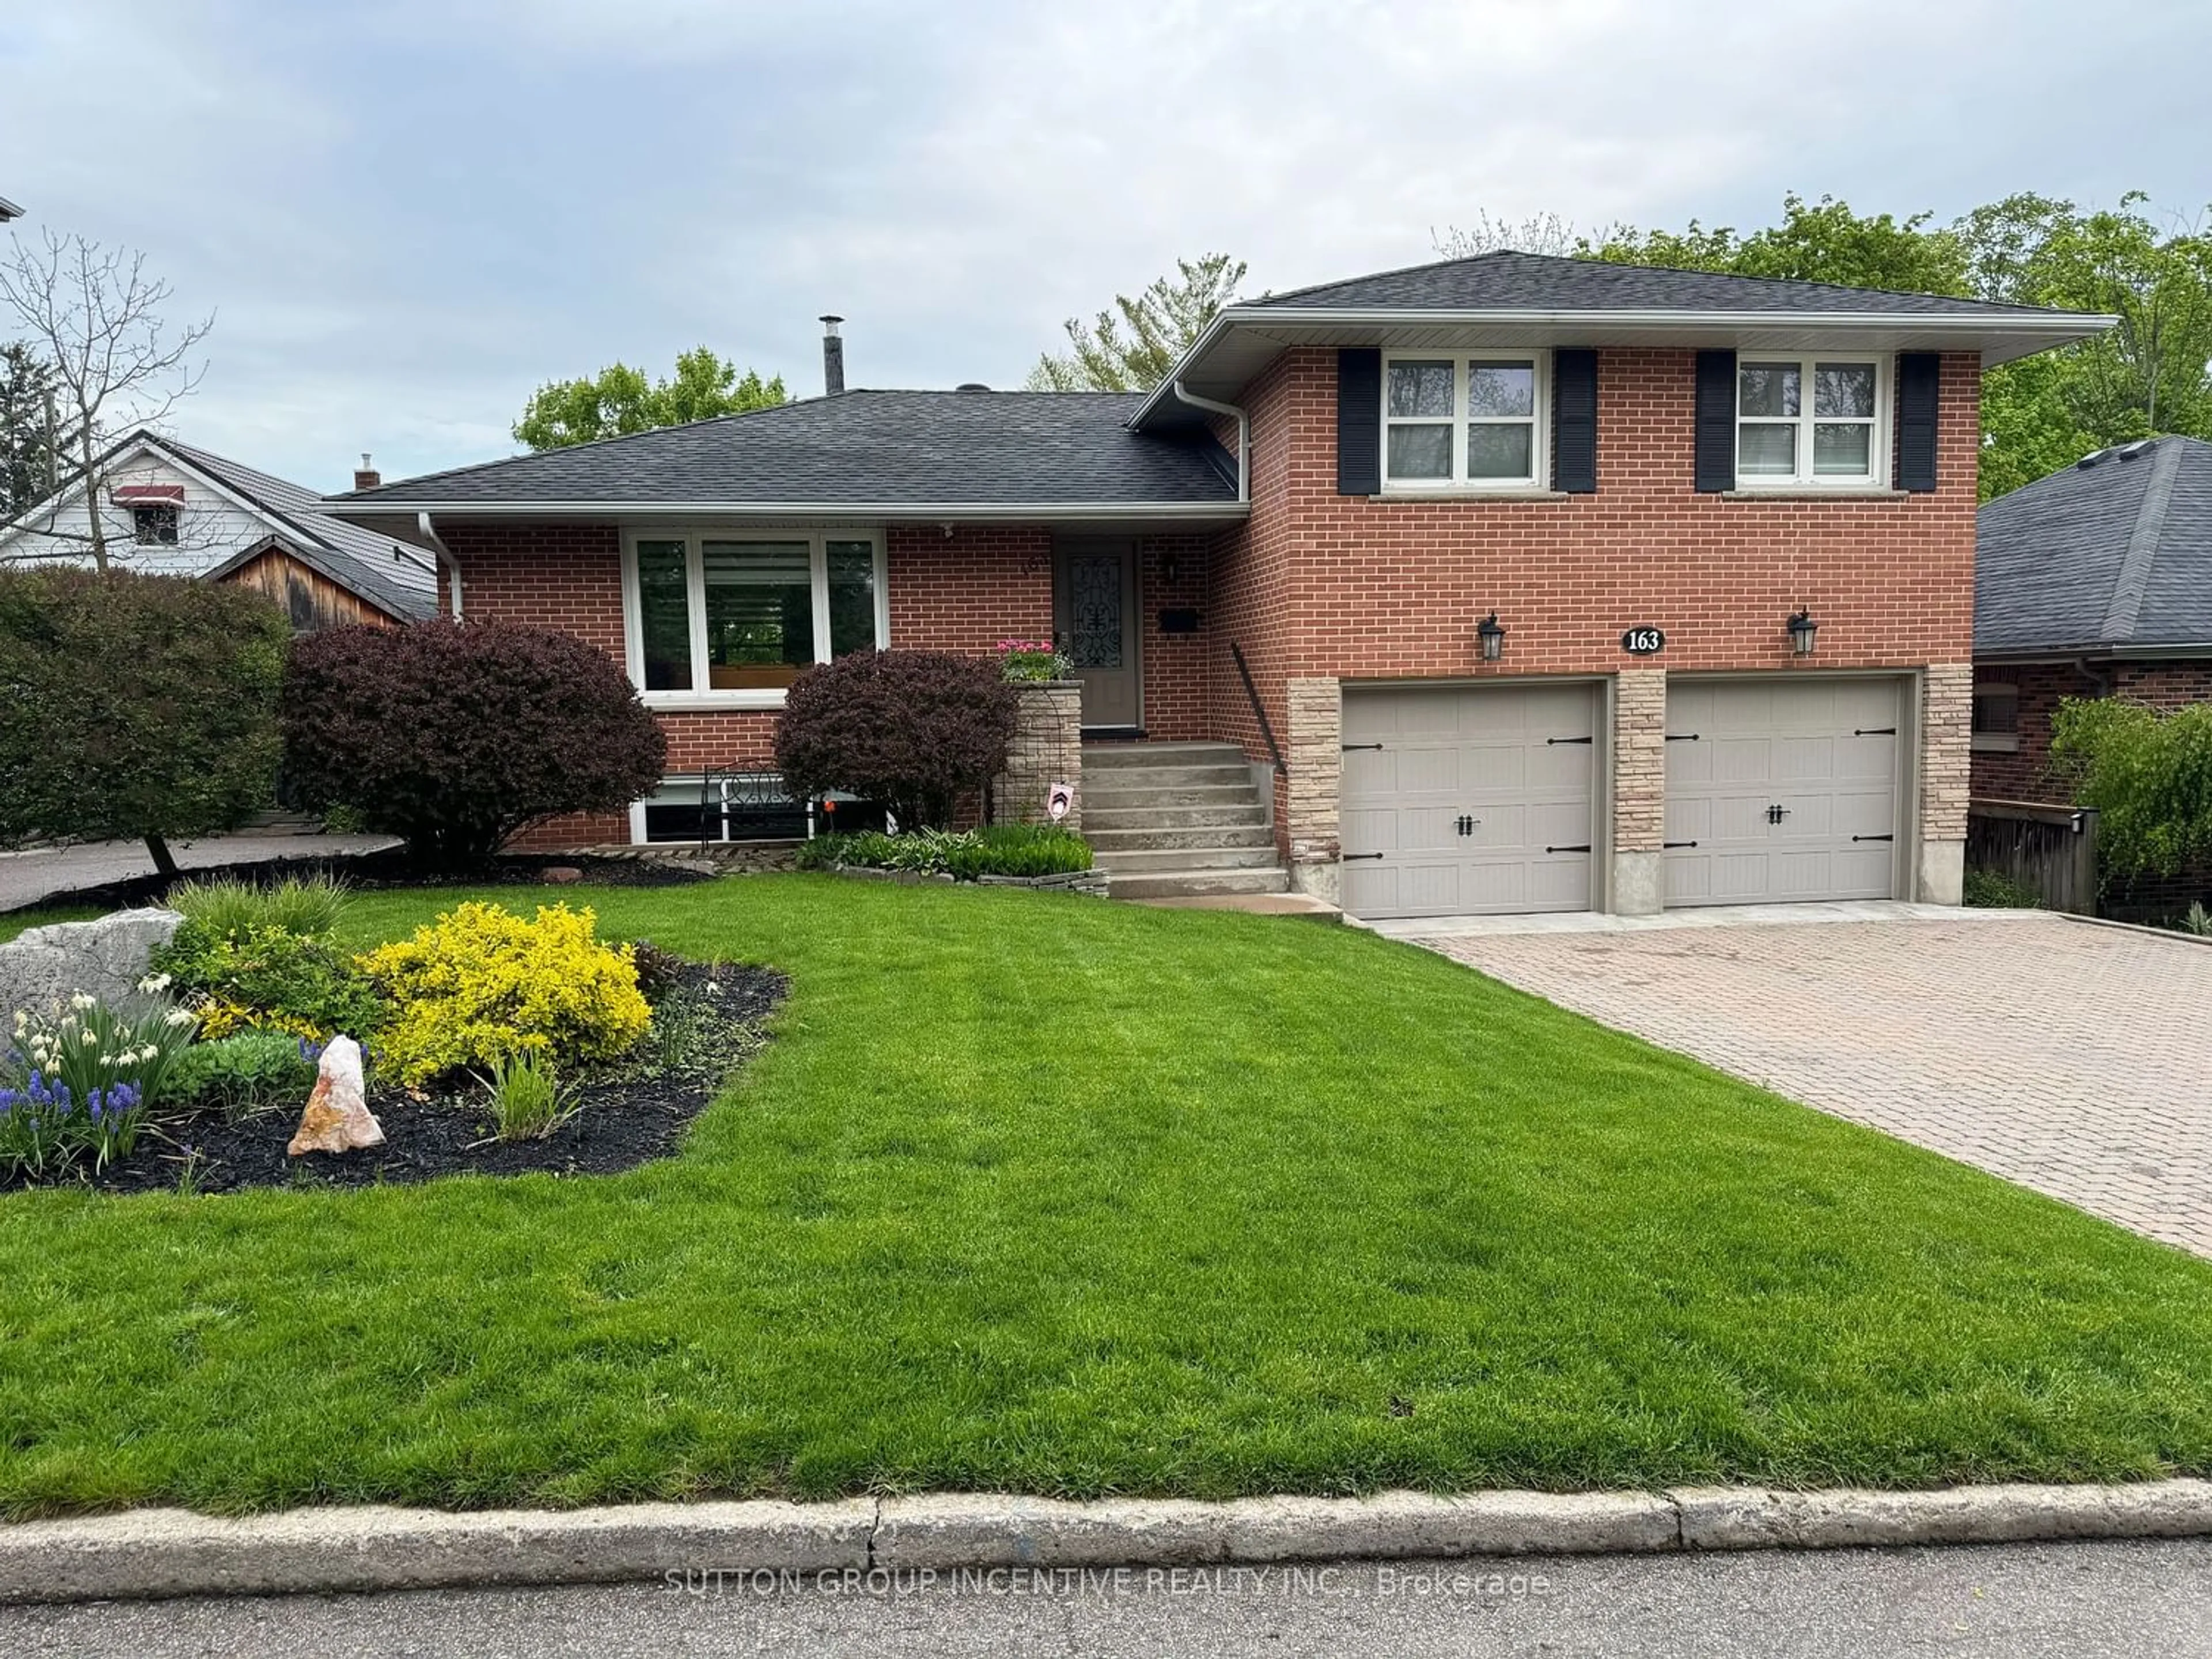 Home with brick exterior material for 163 Clapperton St, Barrie Ontario L4M 3G5